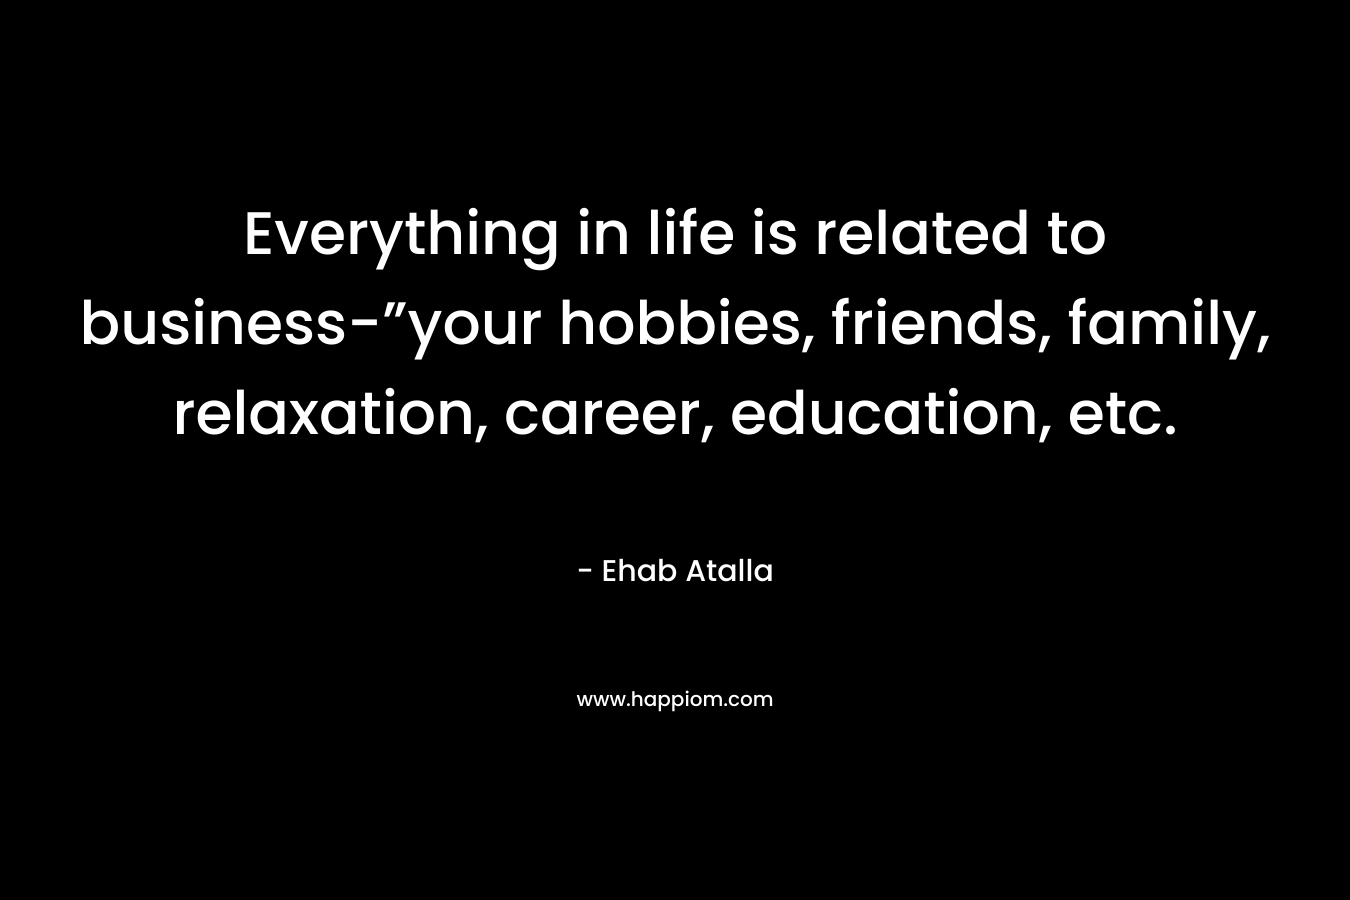 Everything in life is related to business-”your hobbies, friends, family, relaxation, career, education, etc. – Ehab Atalla